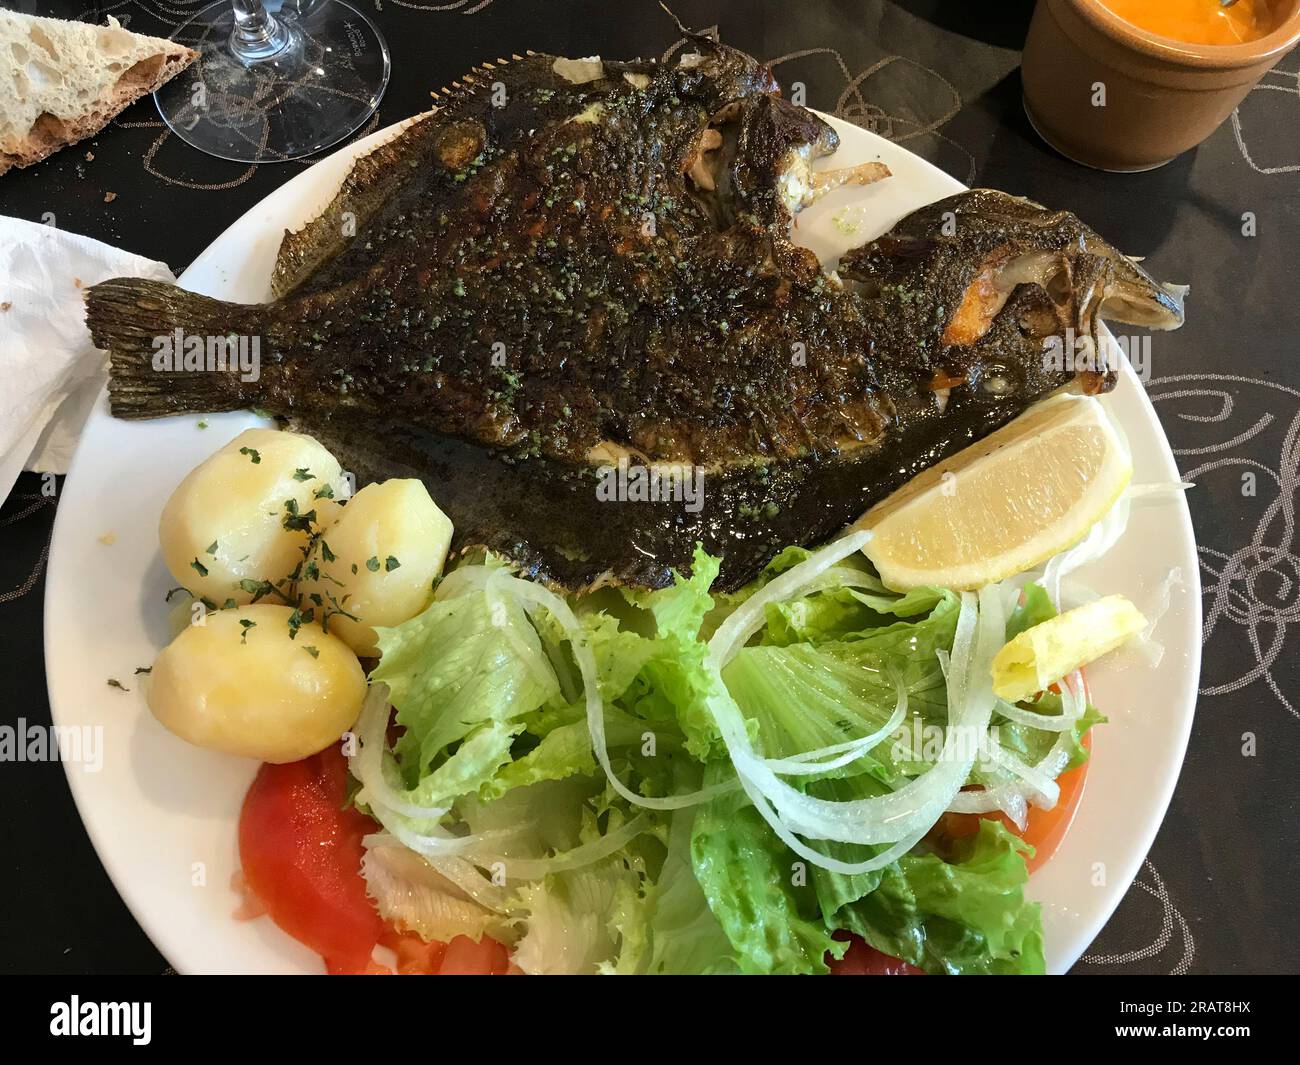 Dish of roosterfish served with potatoes, tomato, lettuce and onion salad and a slice of lemon. Stock Photo